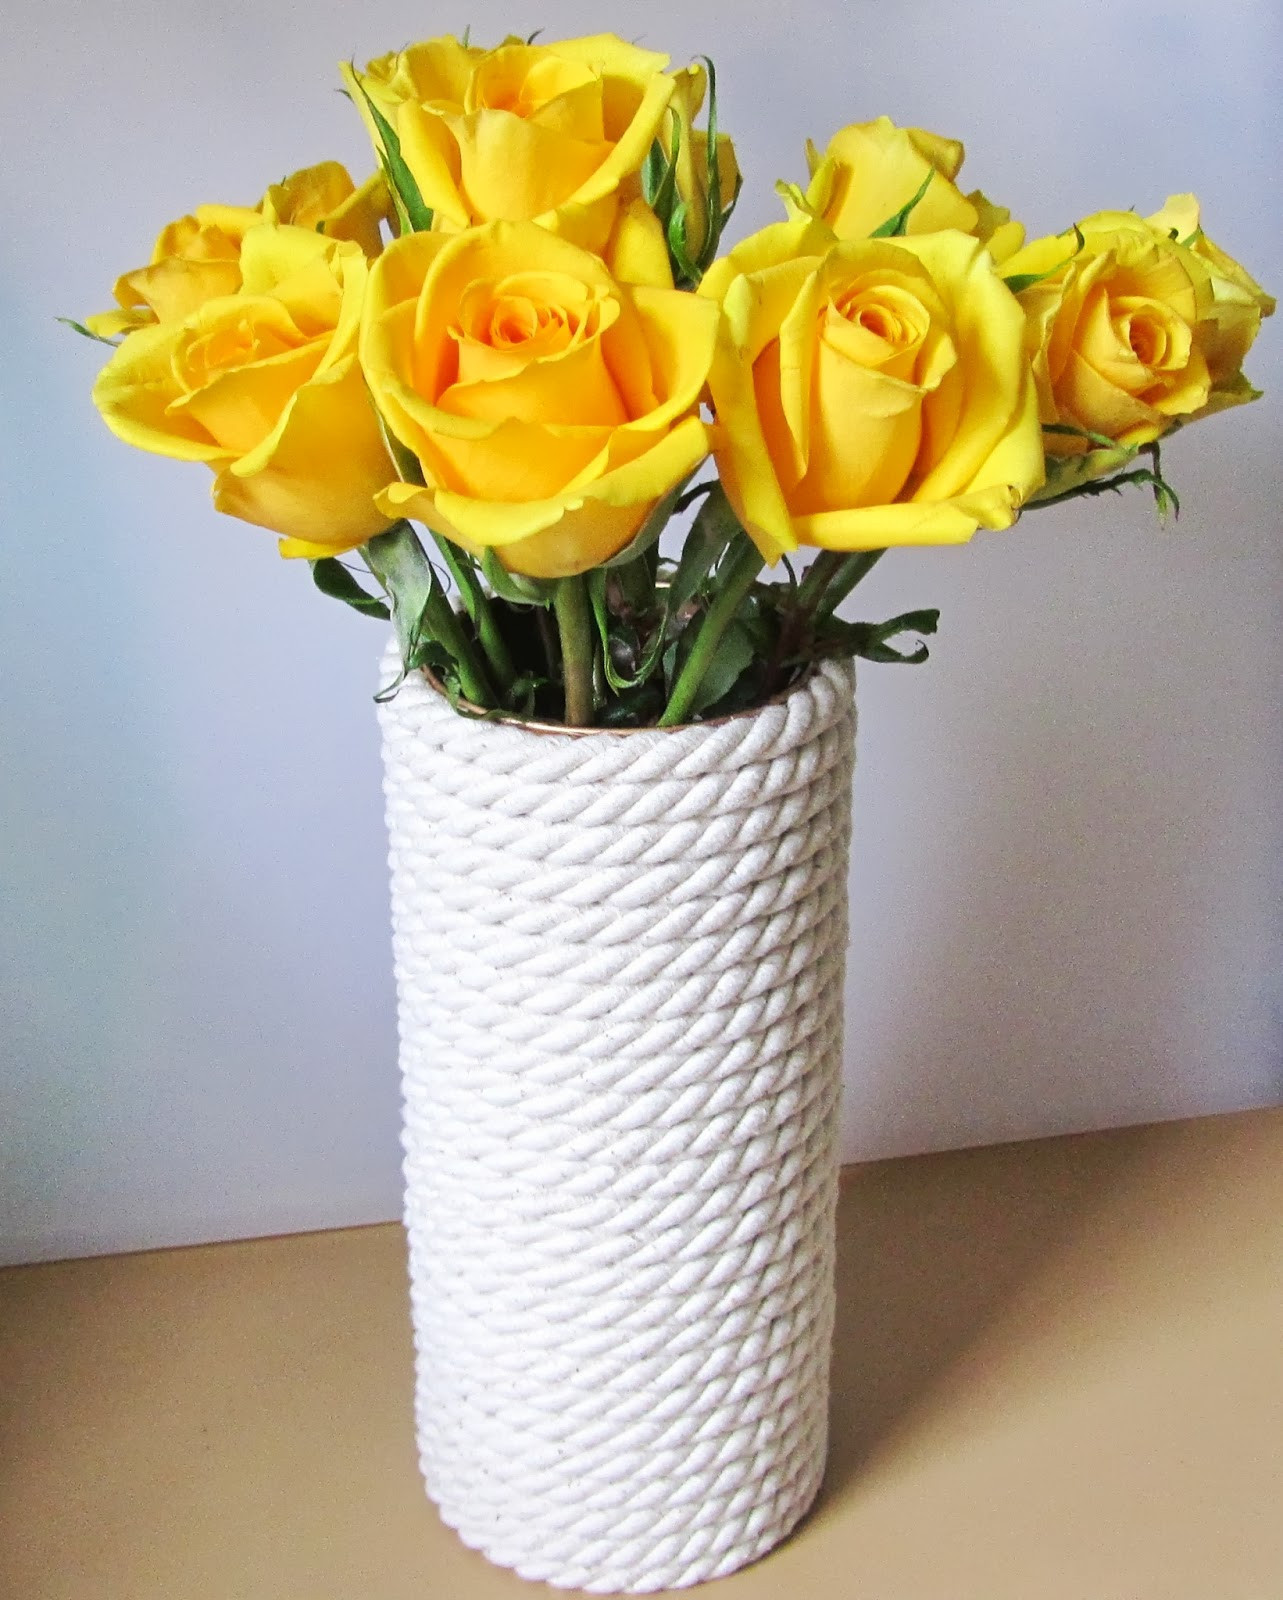 23 Fashionable Yellow Vases and Bowls 2024 free download yellow vases and bowls of yellow vase filler image nautical centerpieceh vases vase savei 0d throughout yellow vase filler image nautical centerpieceh vases vase savei 0d for flowers uk fill